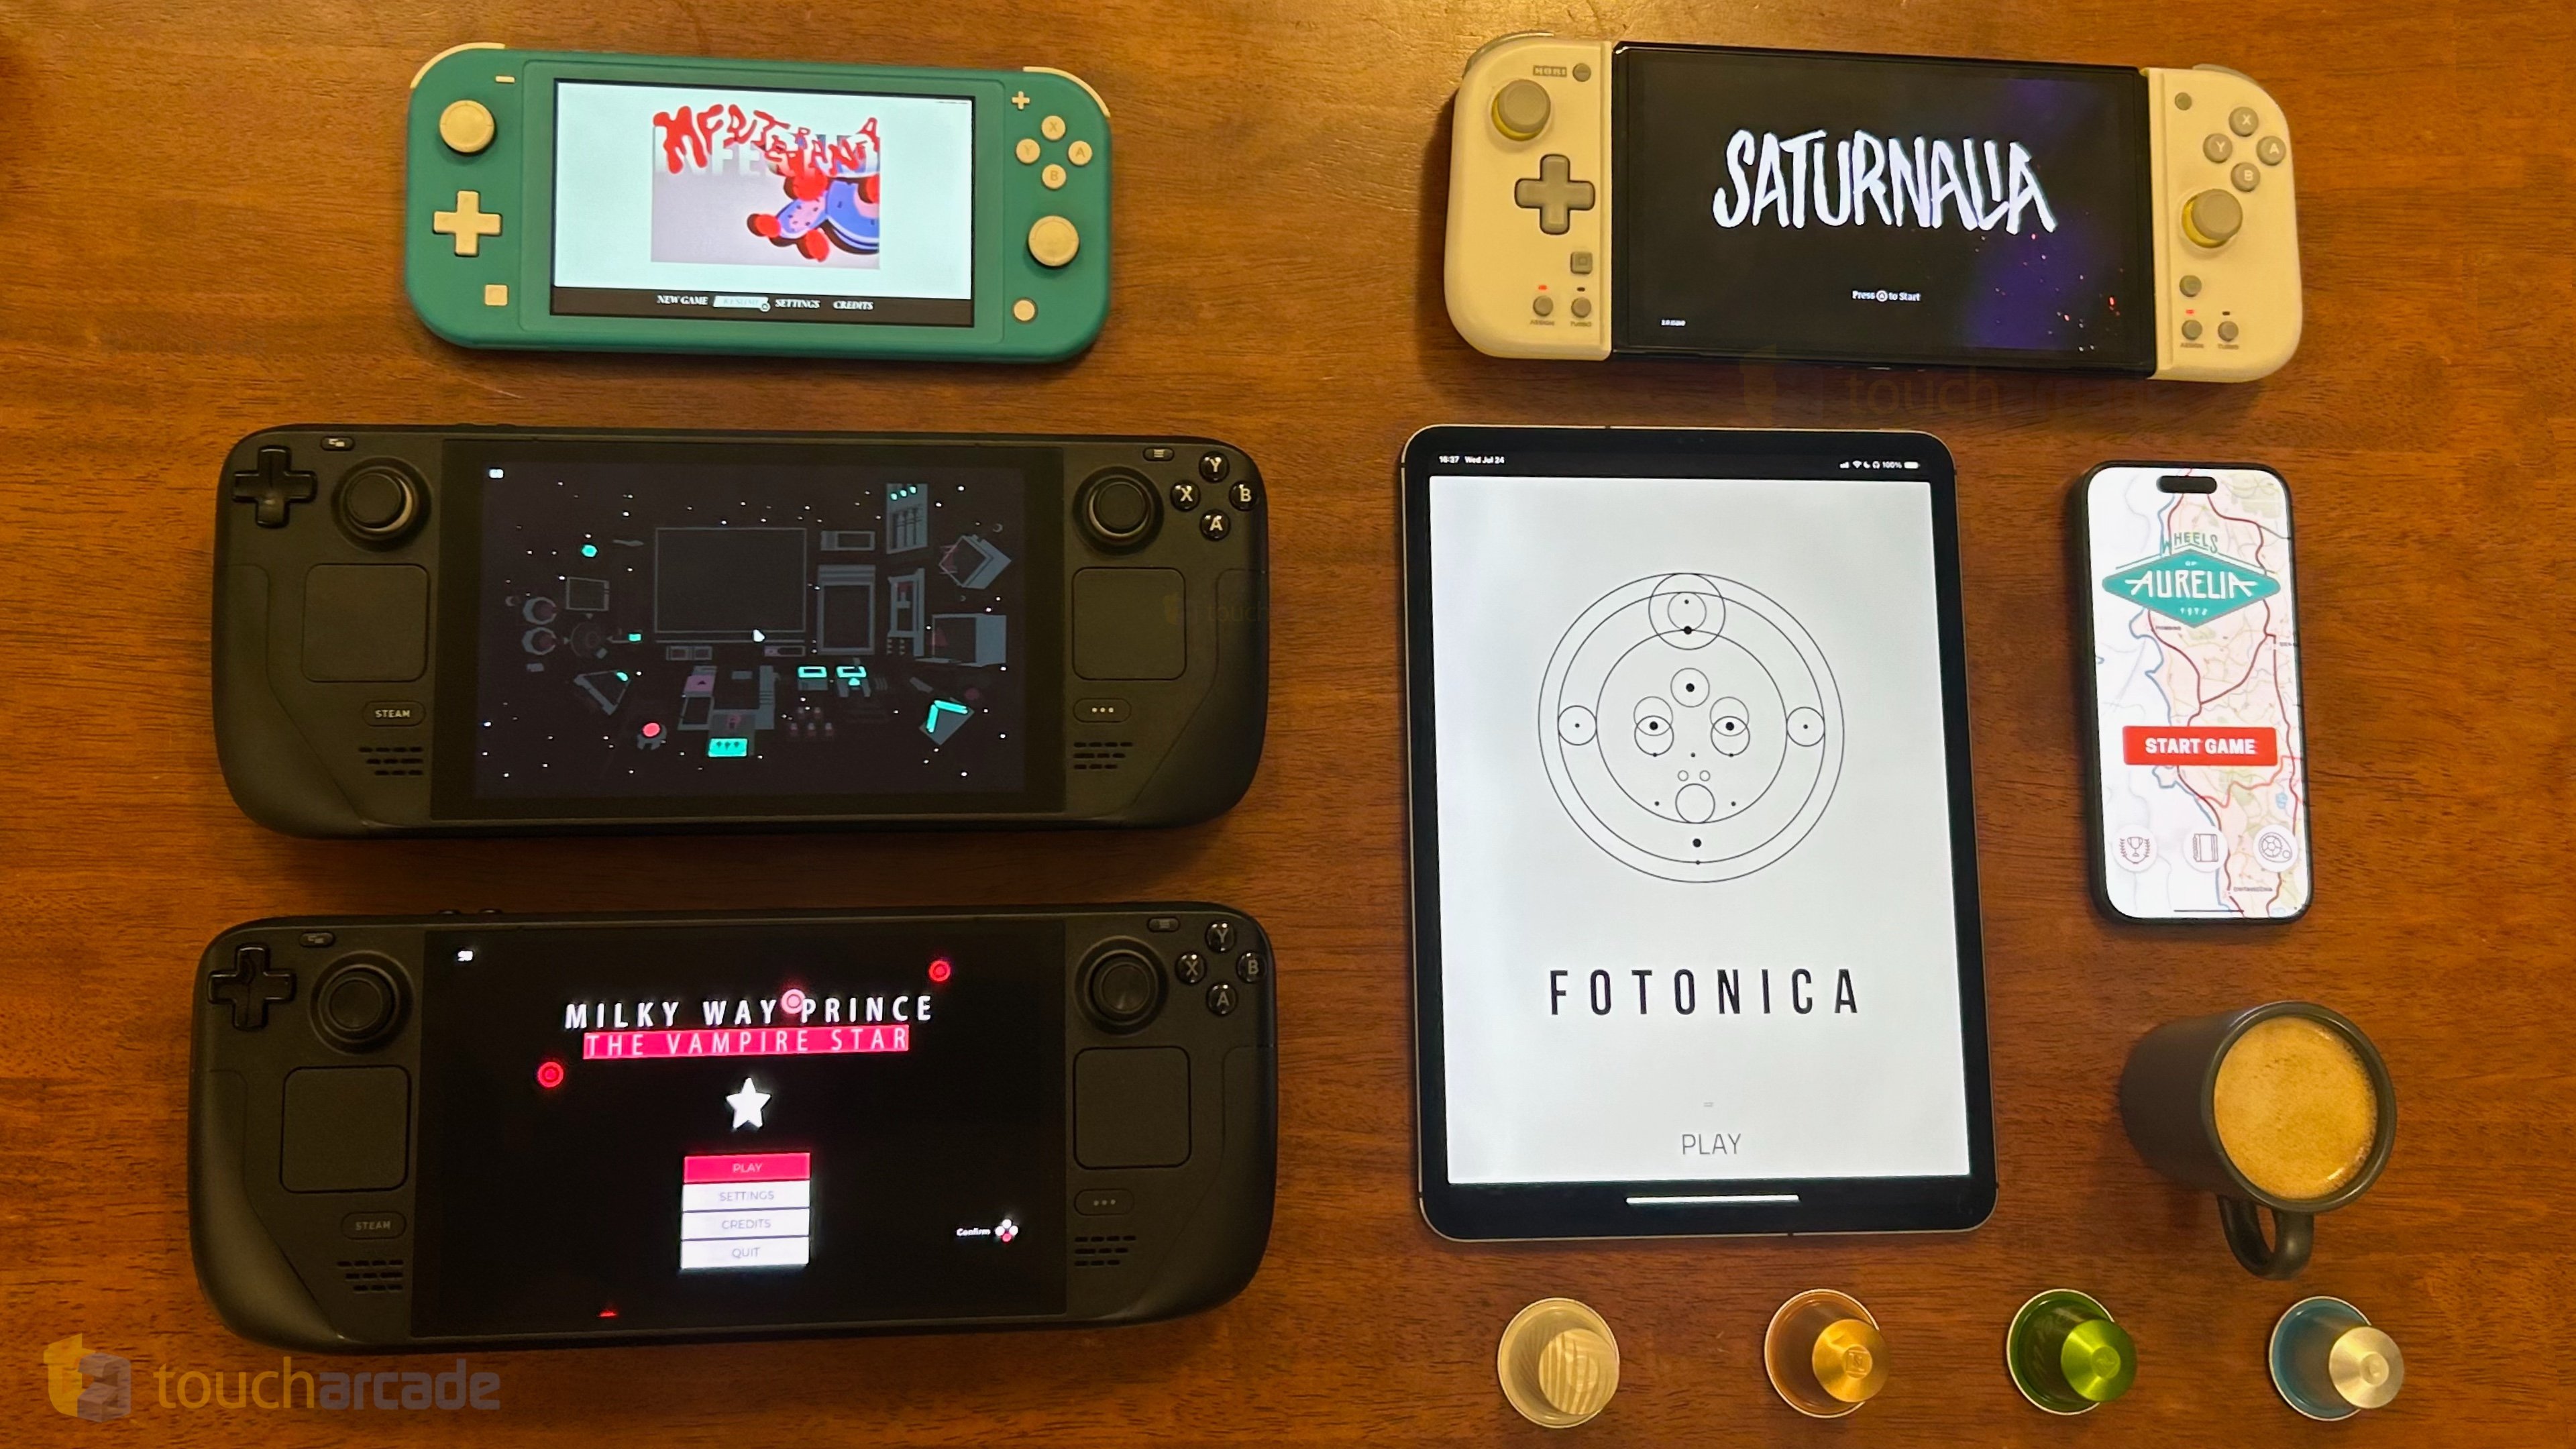 Santa Ragione Interview: Pietro Righi Riva on Game Design, Experimentation, HORSES, Game Subscriptions, Physical Releases, Curation, and Much More